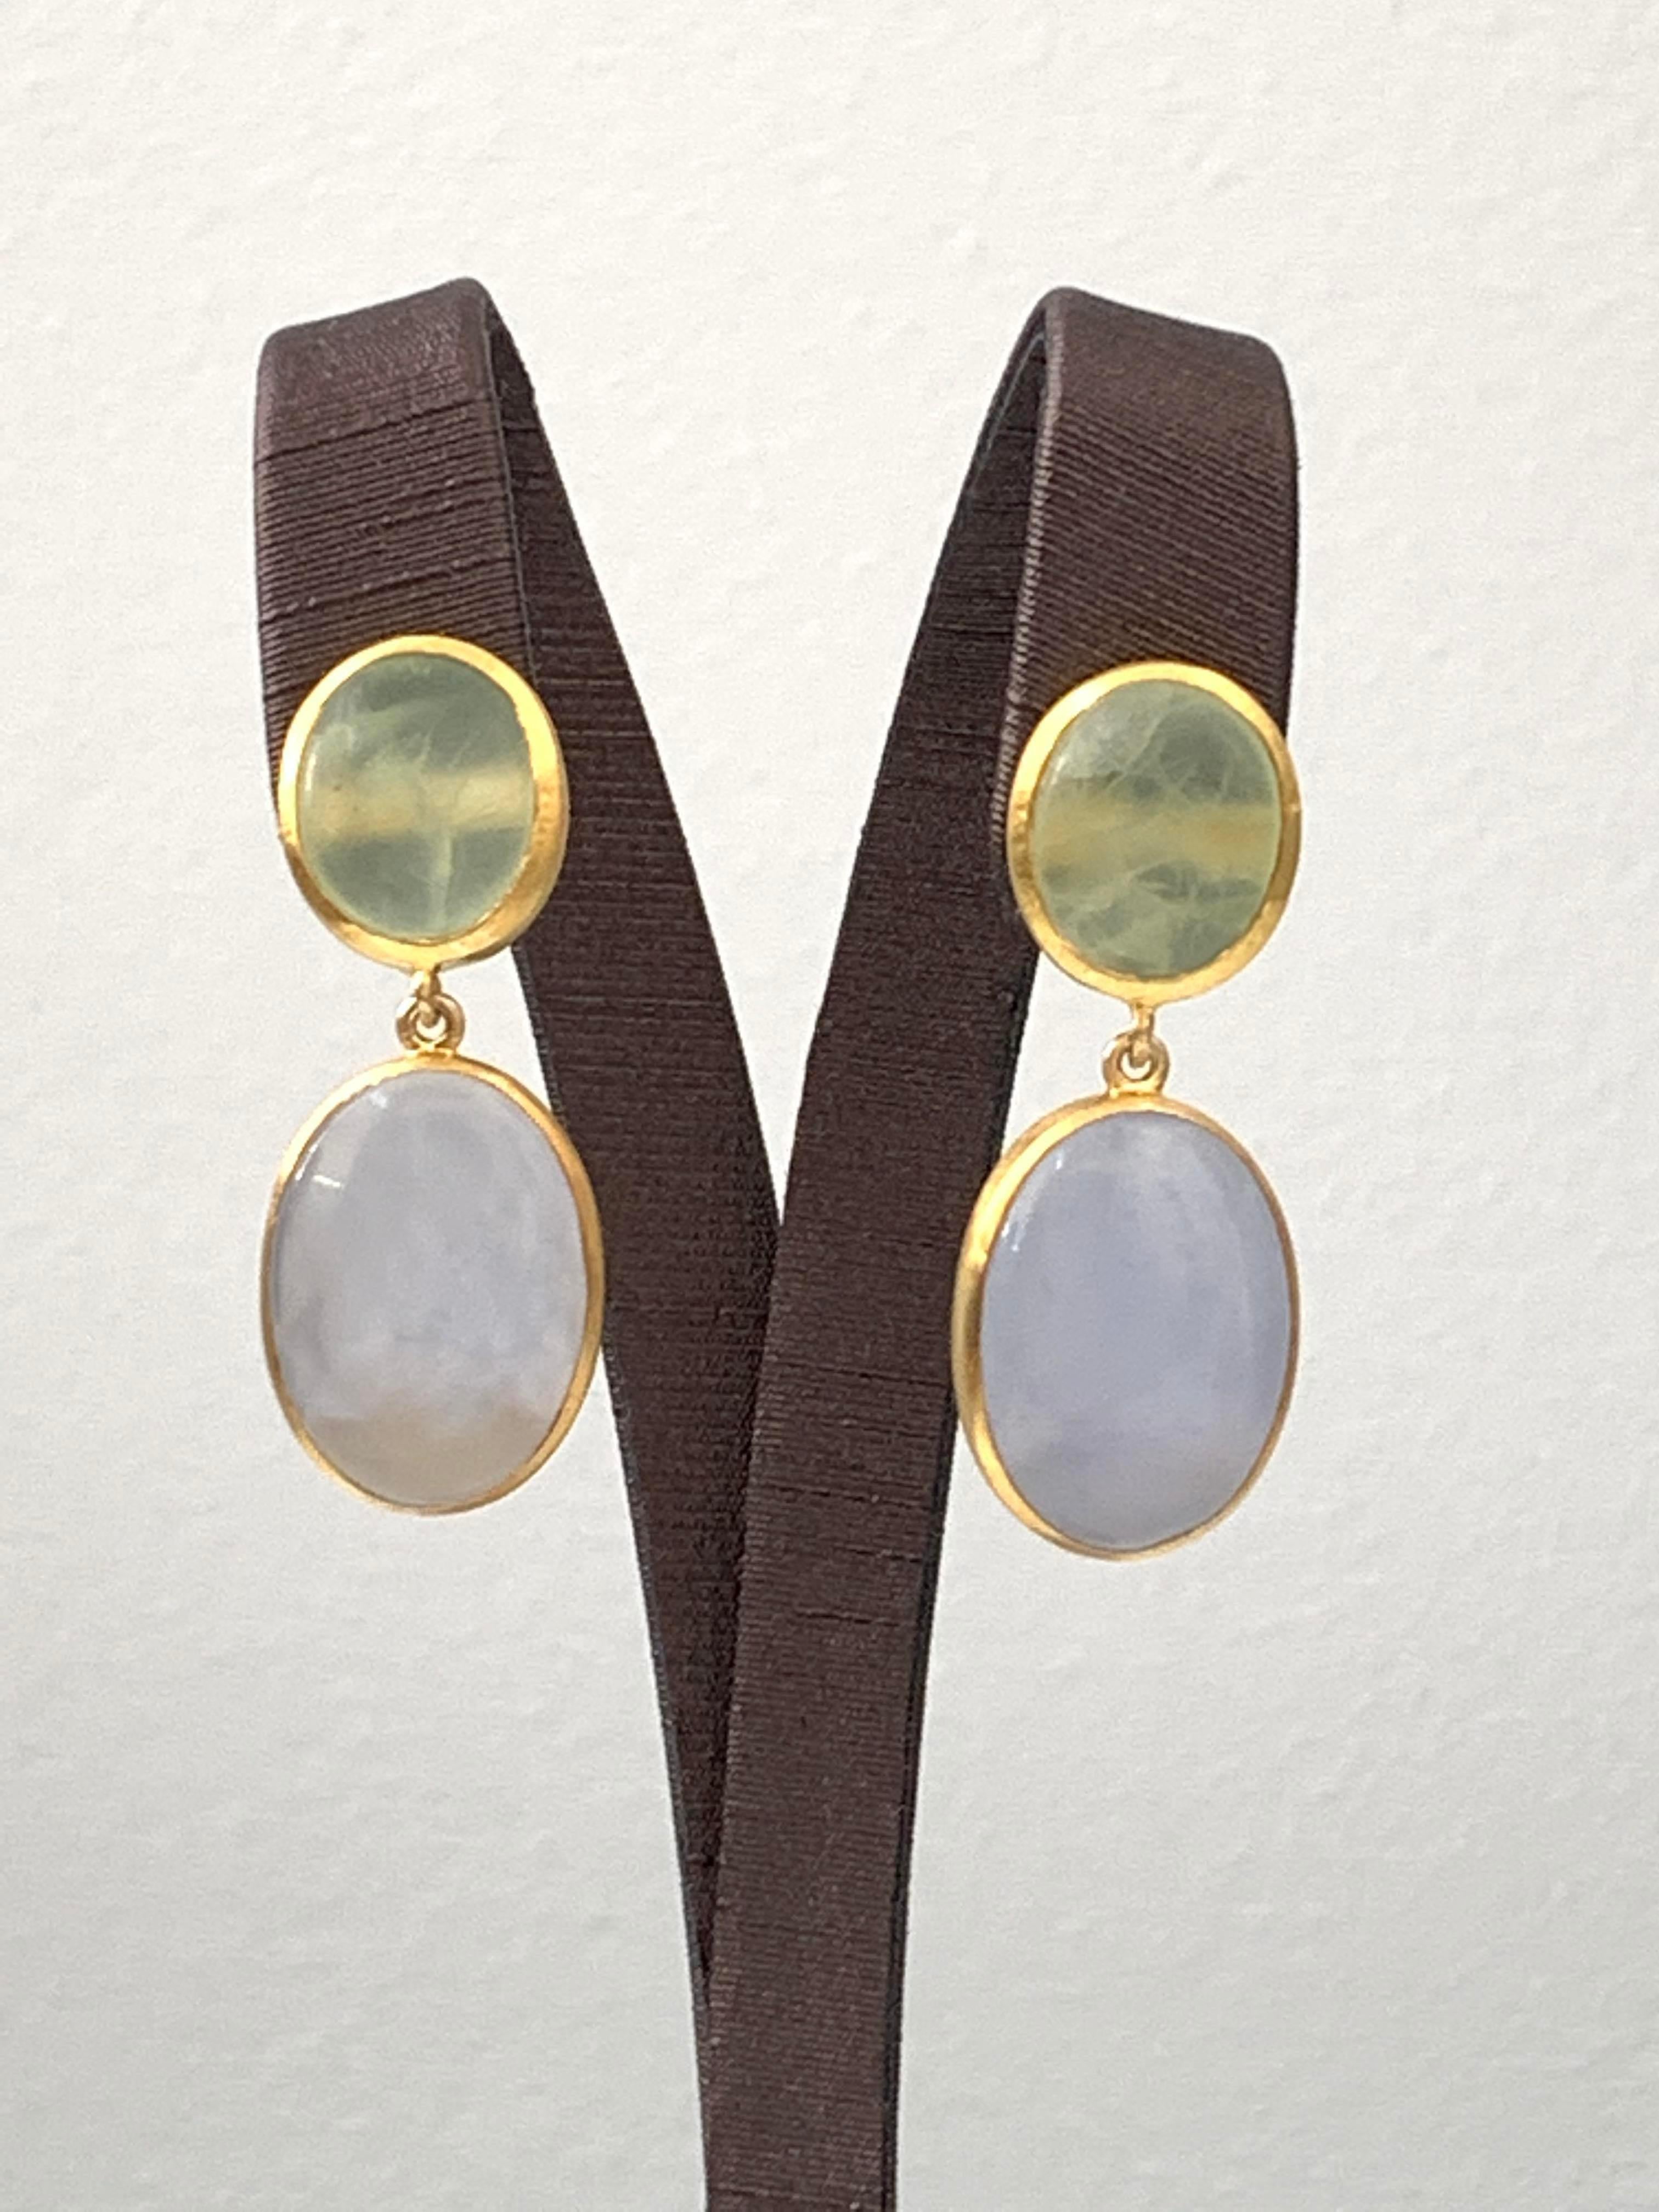 Discover double oval cabochon-cut Prehnite and Chalcedony Vermeil Dangle Earrings. . Hand set in 18k gold plated sterling silver. Straight post with large earrings back for comfort and safety. 1.5